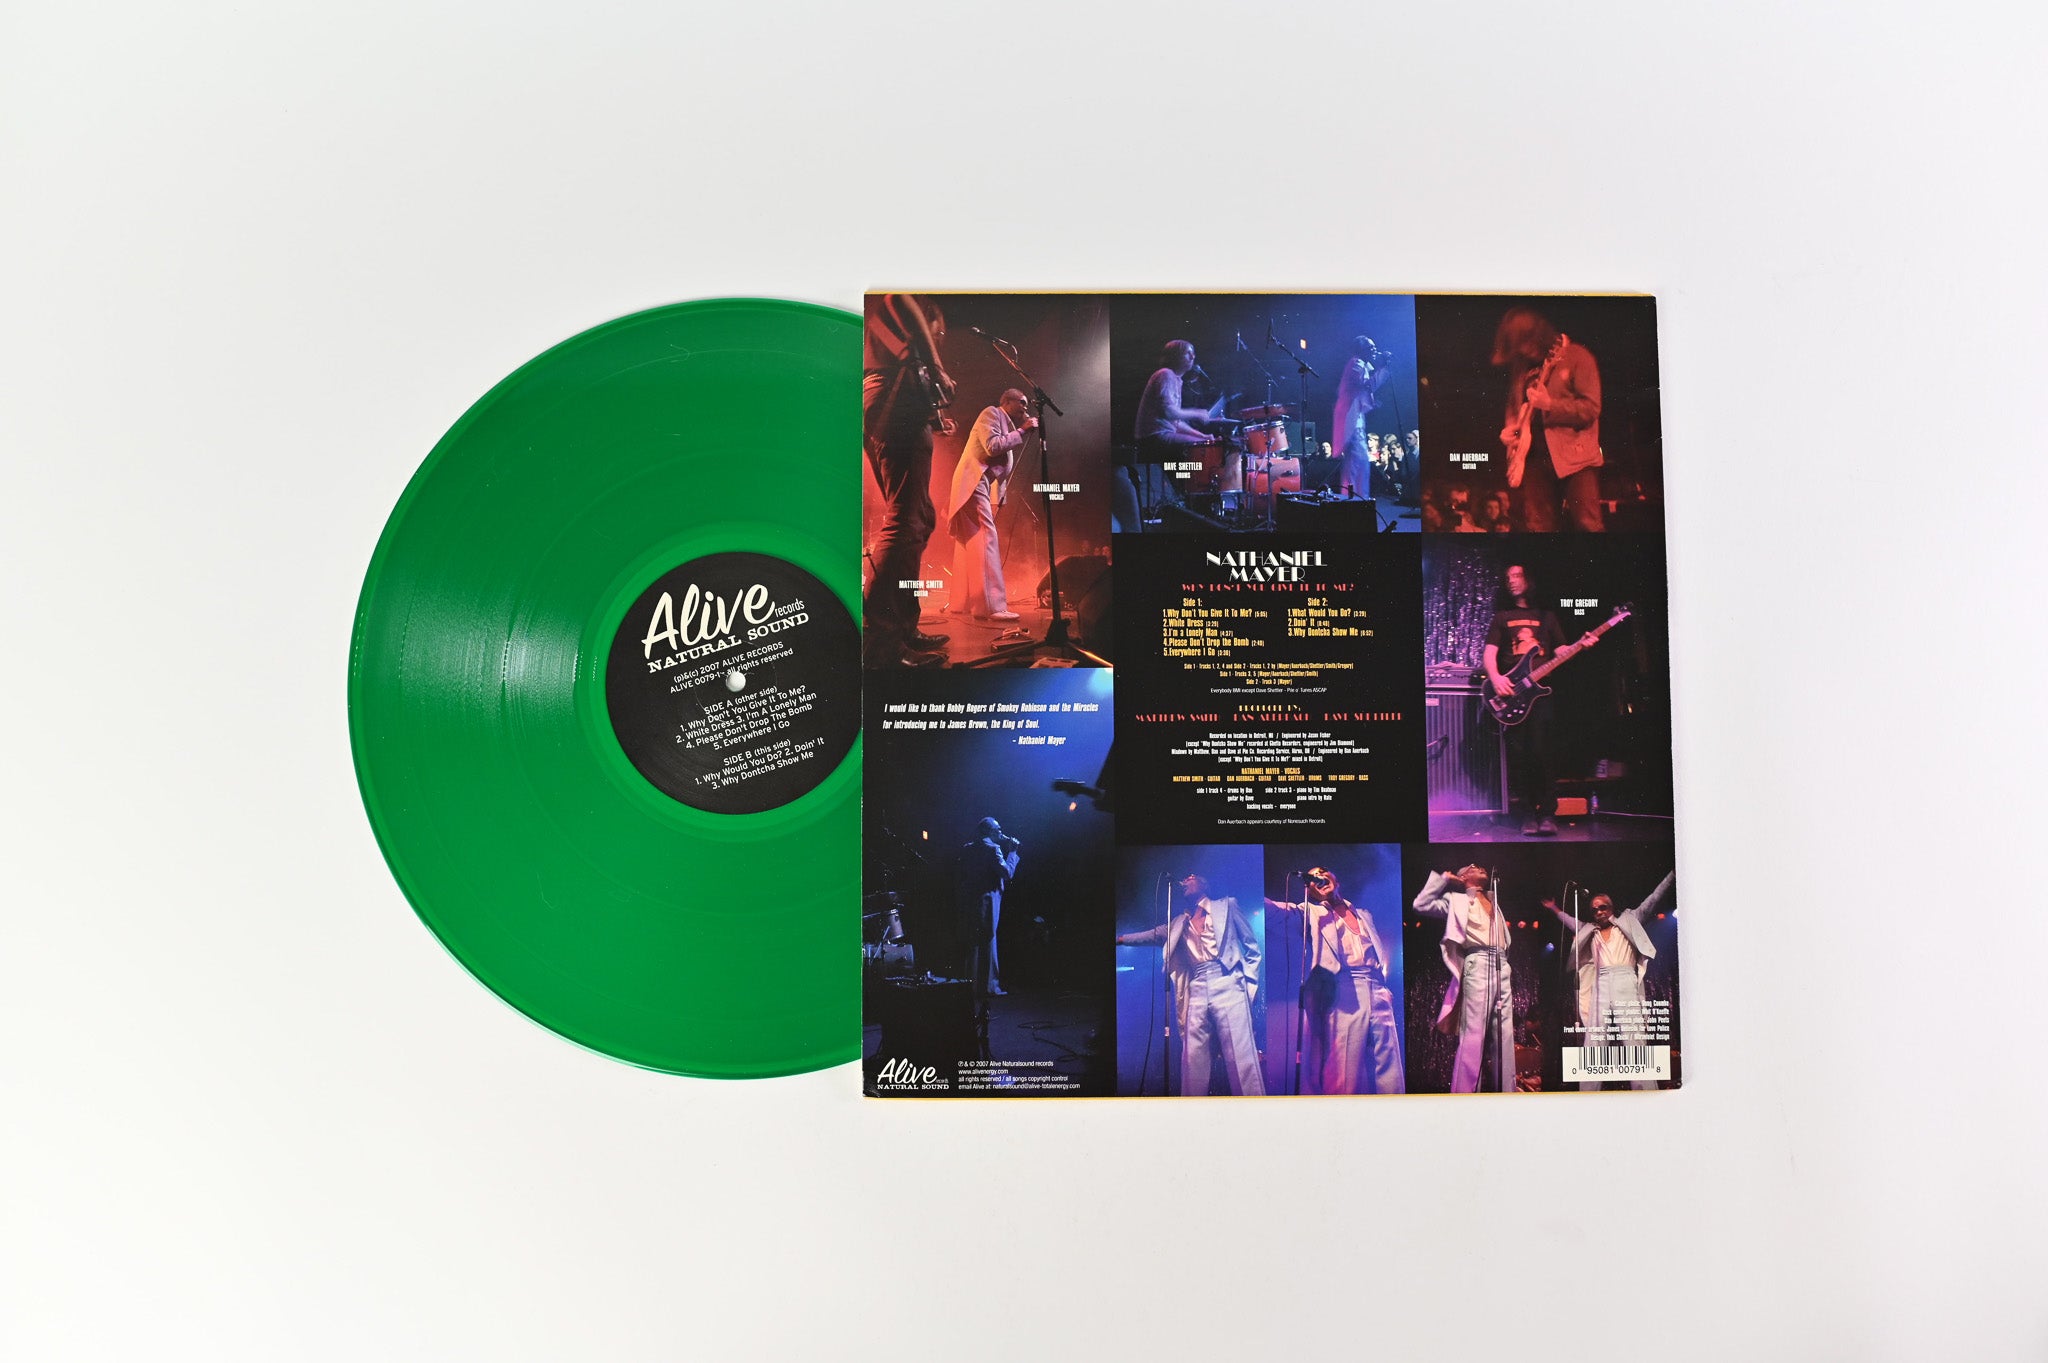 Nathaniel Mayer - Why Don't You Give It To Me? on Alive Records - Green Vinyl